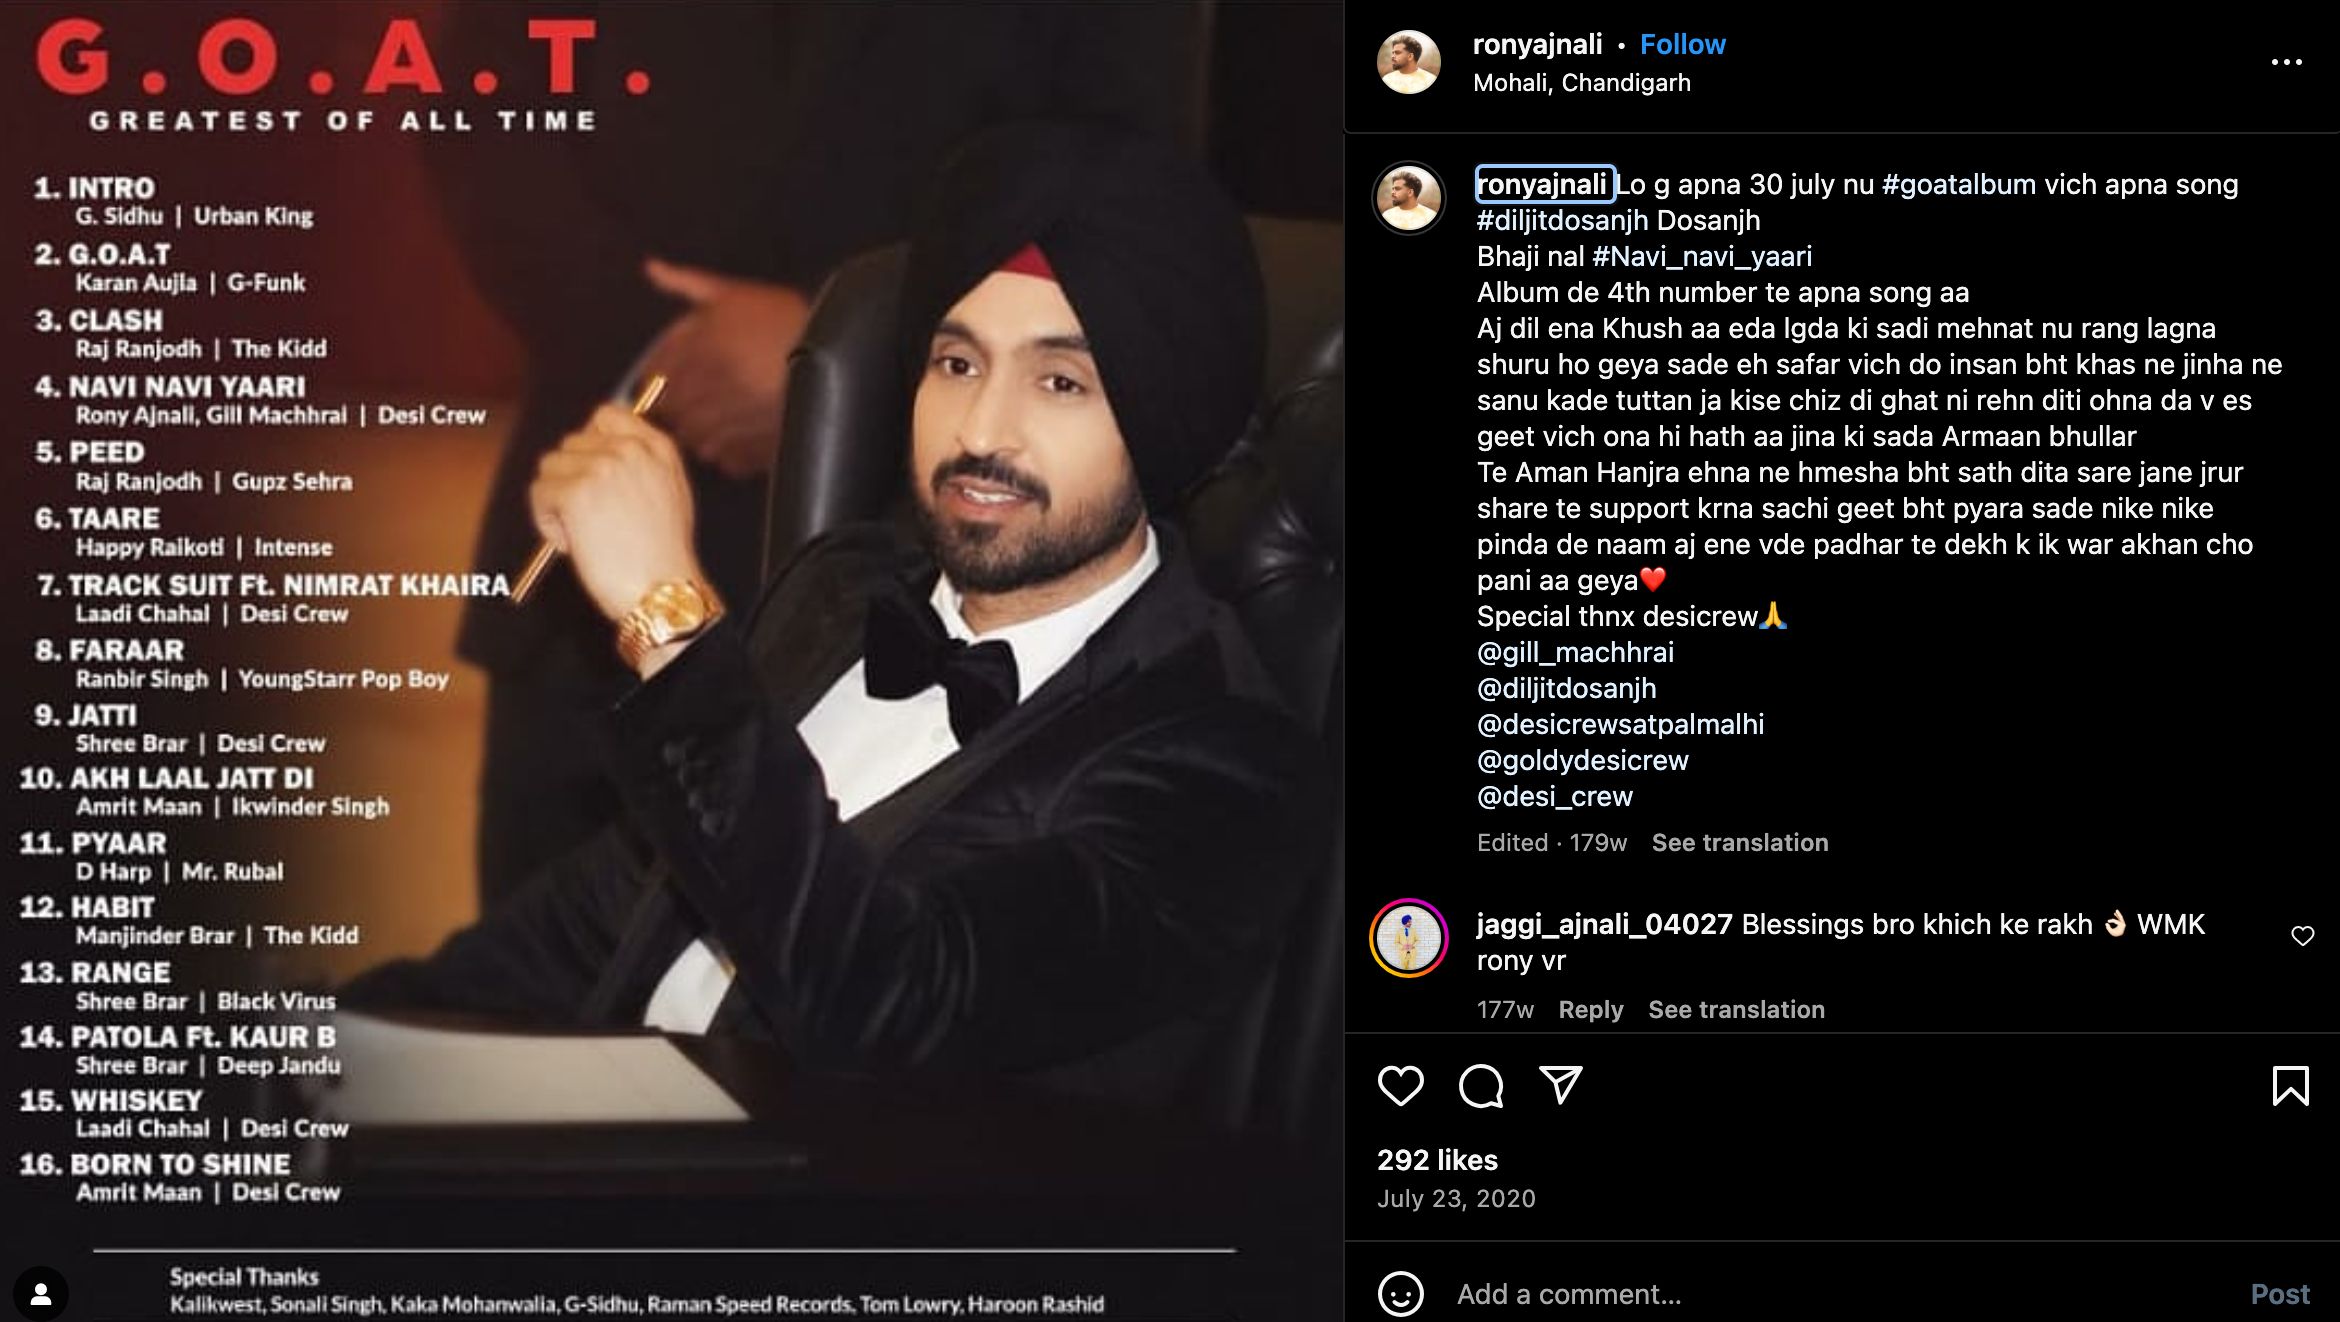 Rony Ajnali's Instagram post about the song 'Navi Navi Yaari' in Diljit Dosanjh's album titled 'G.O.A.T' (2020)